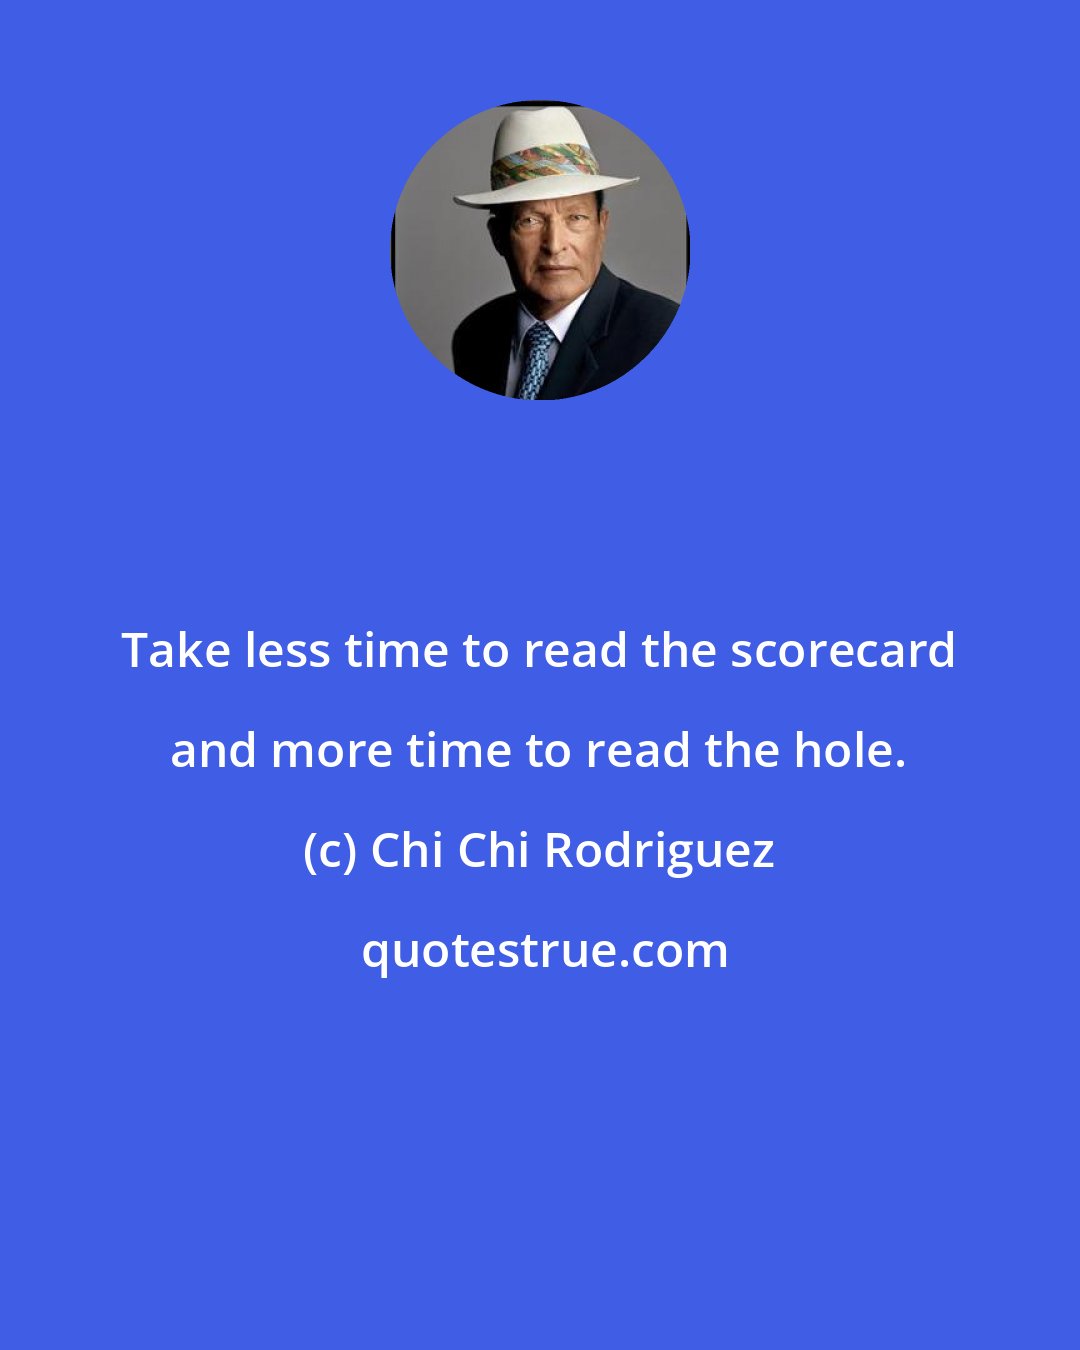 Chi Chi Rodriguez: Take less time to read the scorecard and more time to read the hole.